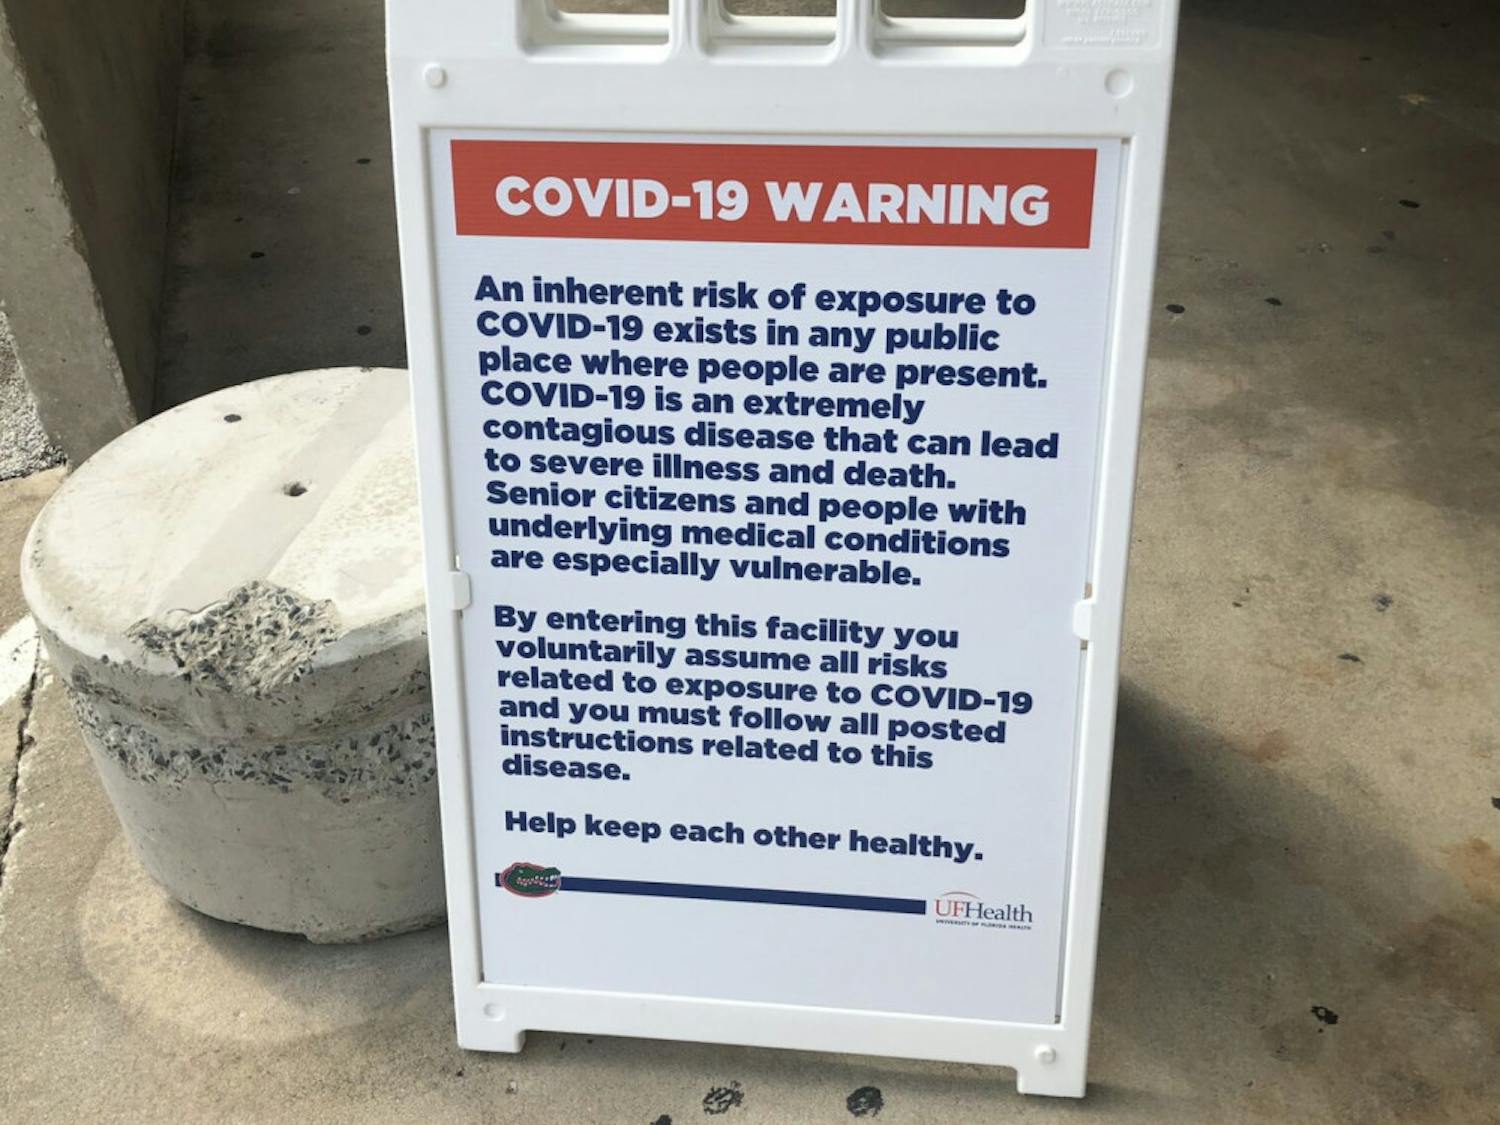 Signage was posted throughout Ben Hill Griffin Stadium Saturday, reminding spectators of the risks associated with attending the game and reinforcing UF's COVID-19 guidelines.